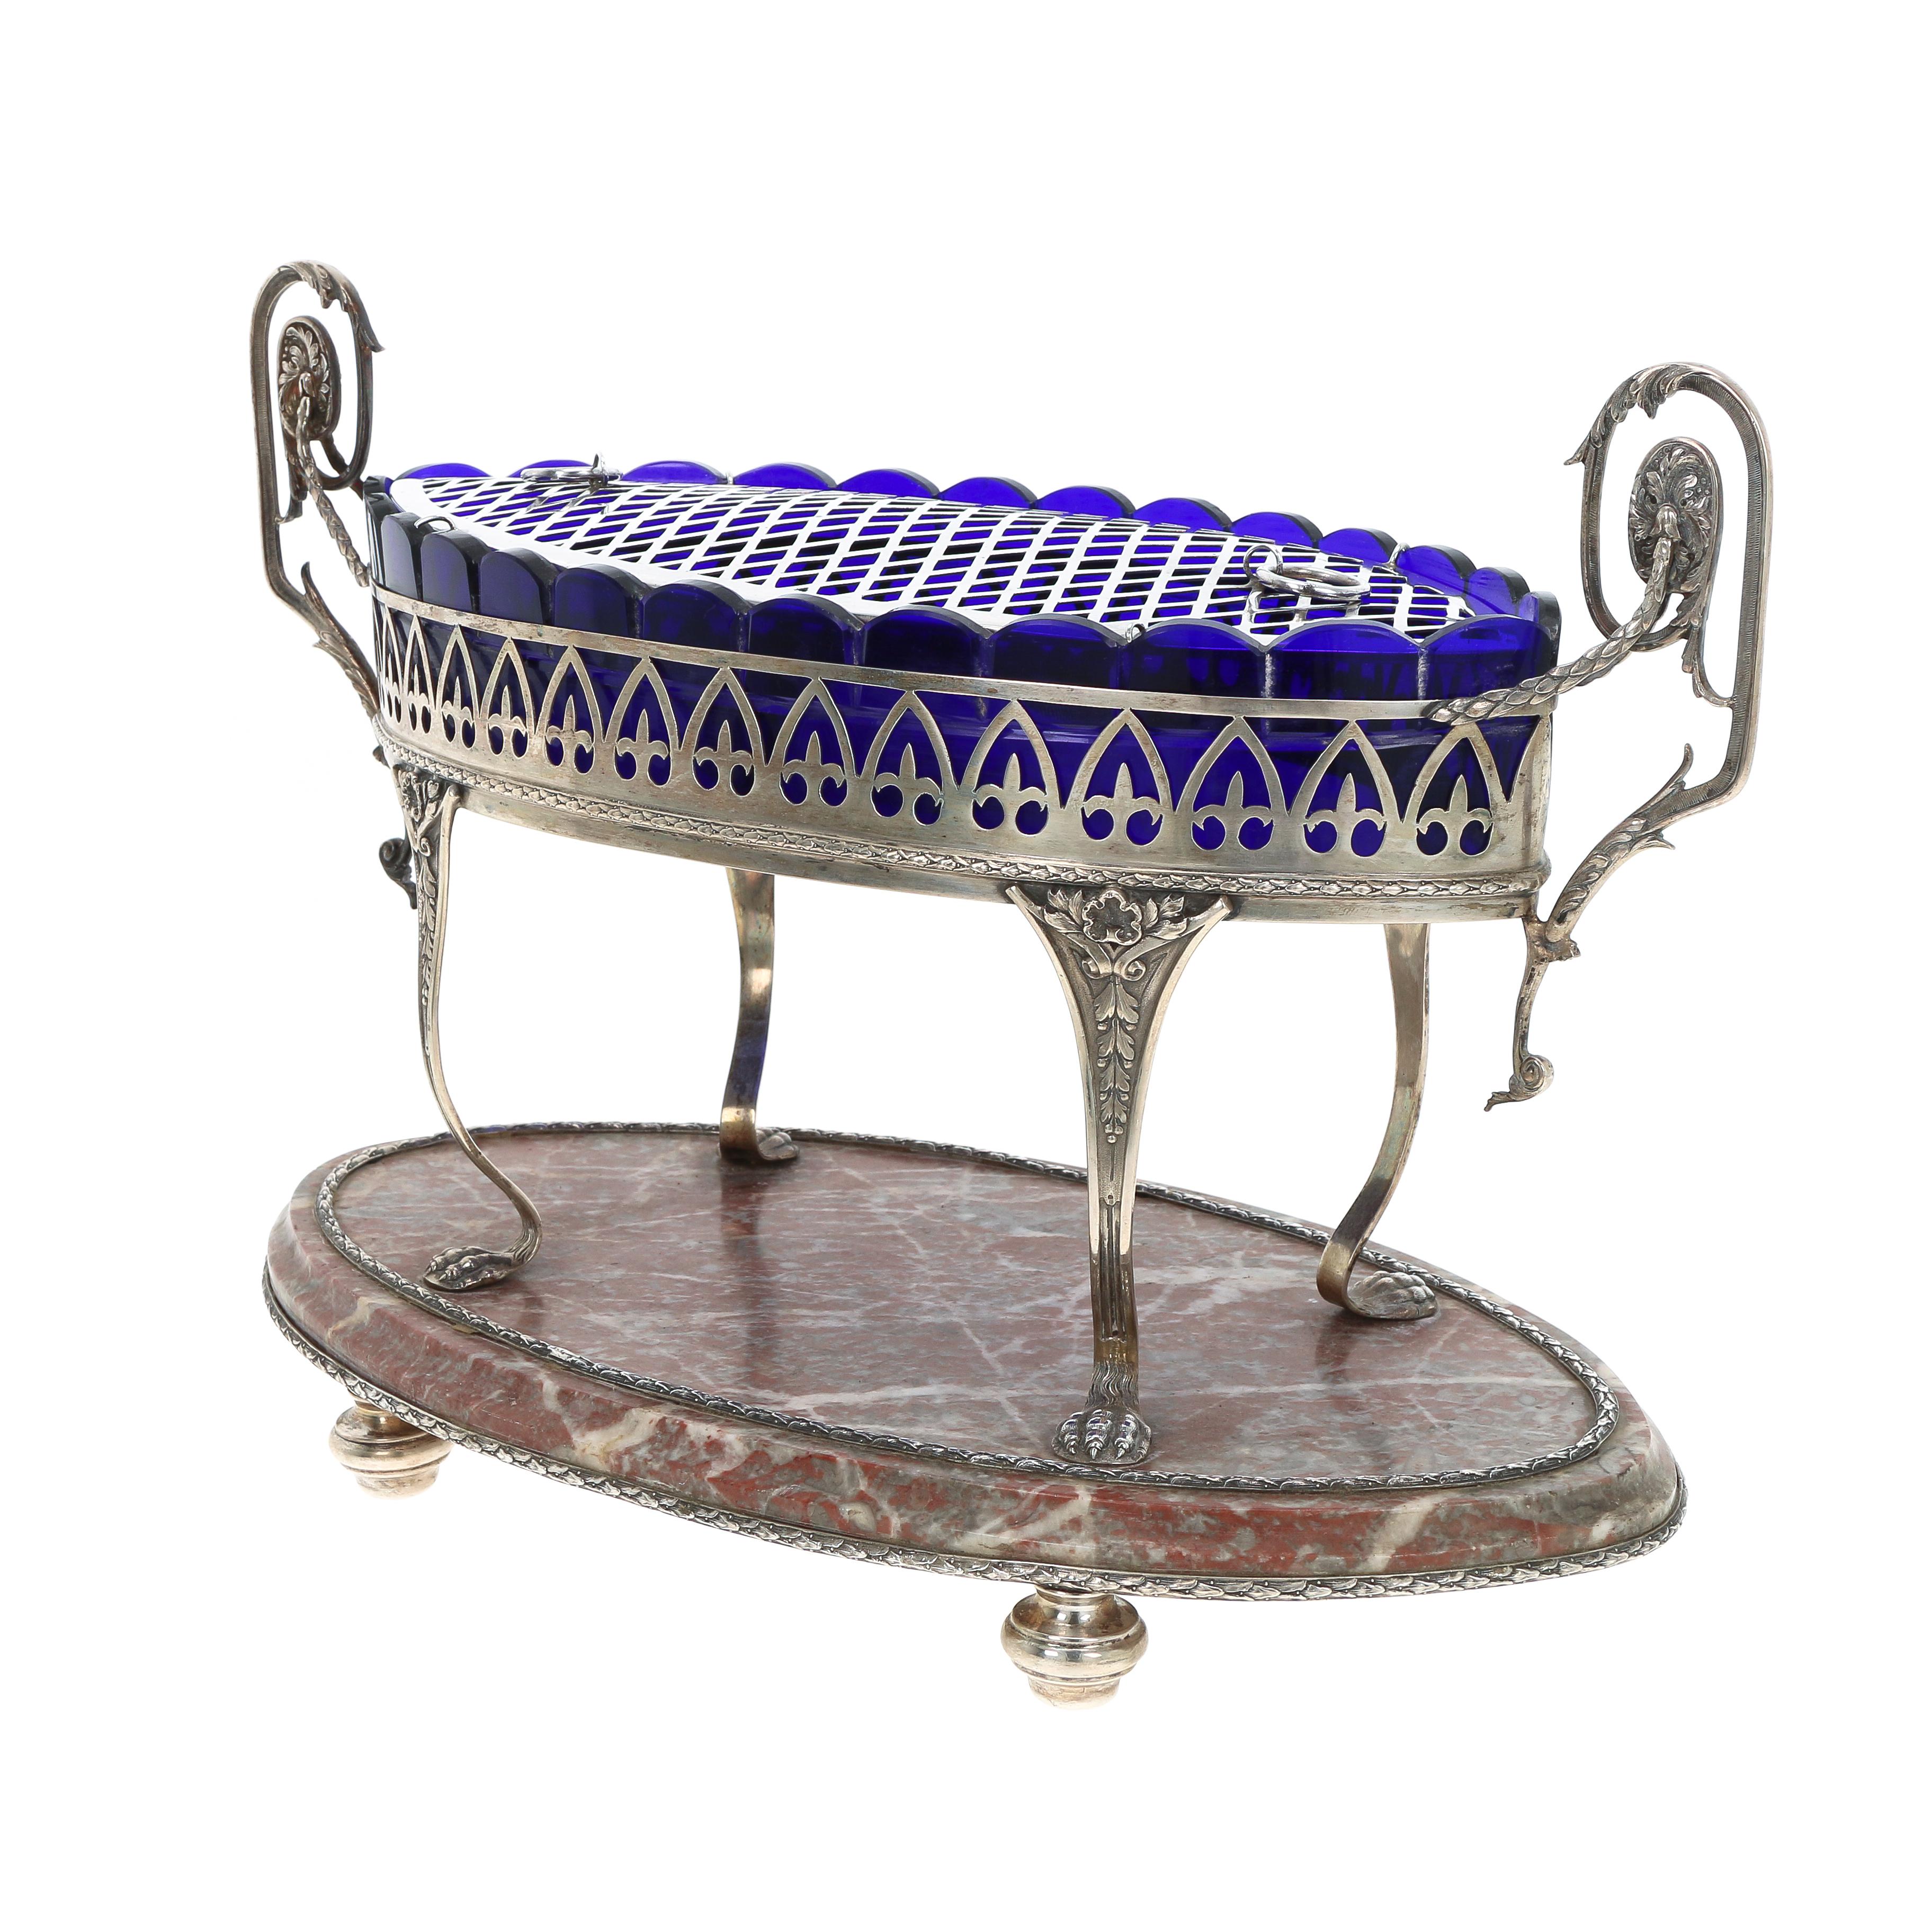 19th Century Silver Centerpiece with Marble and Cobalt Glass

Centerpiece / flower pot in portuguese Silver, contrast 'Javali' (1887-1937). Relieved and hollow decoration with floral motifs, claw feet, marble base and cobalt blue glass core.

-